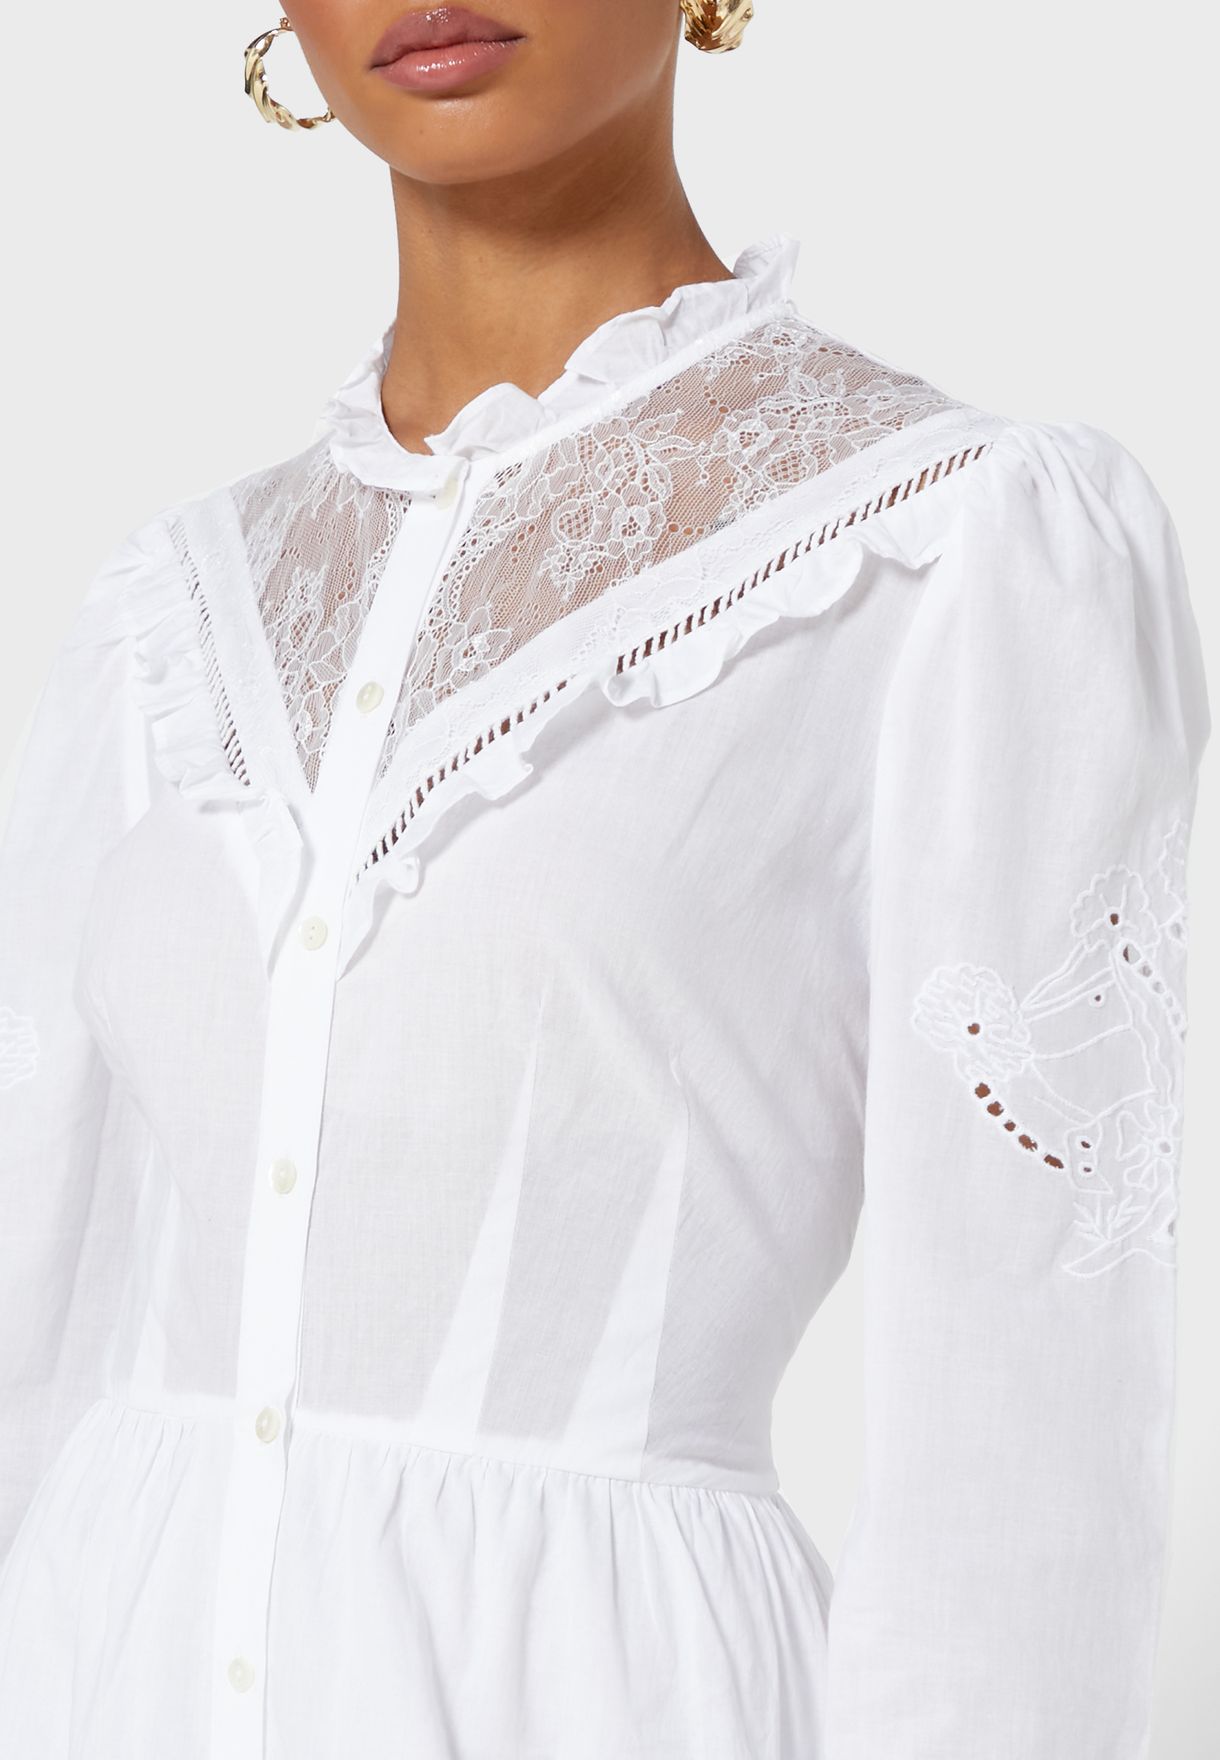 Adeona Button Down Lace Dress